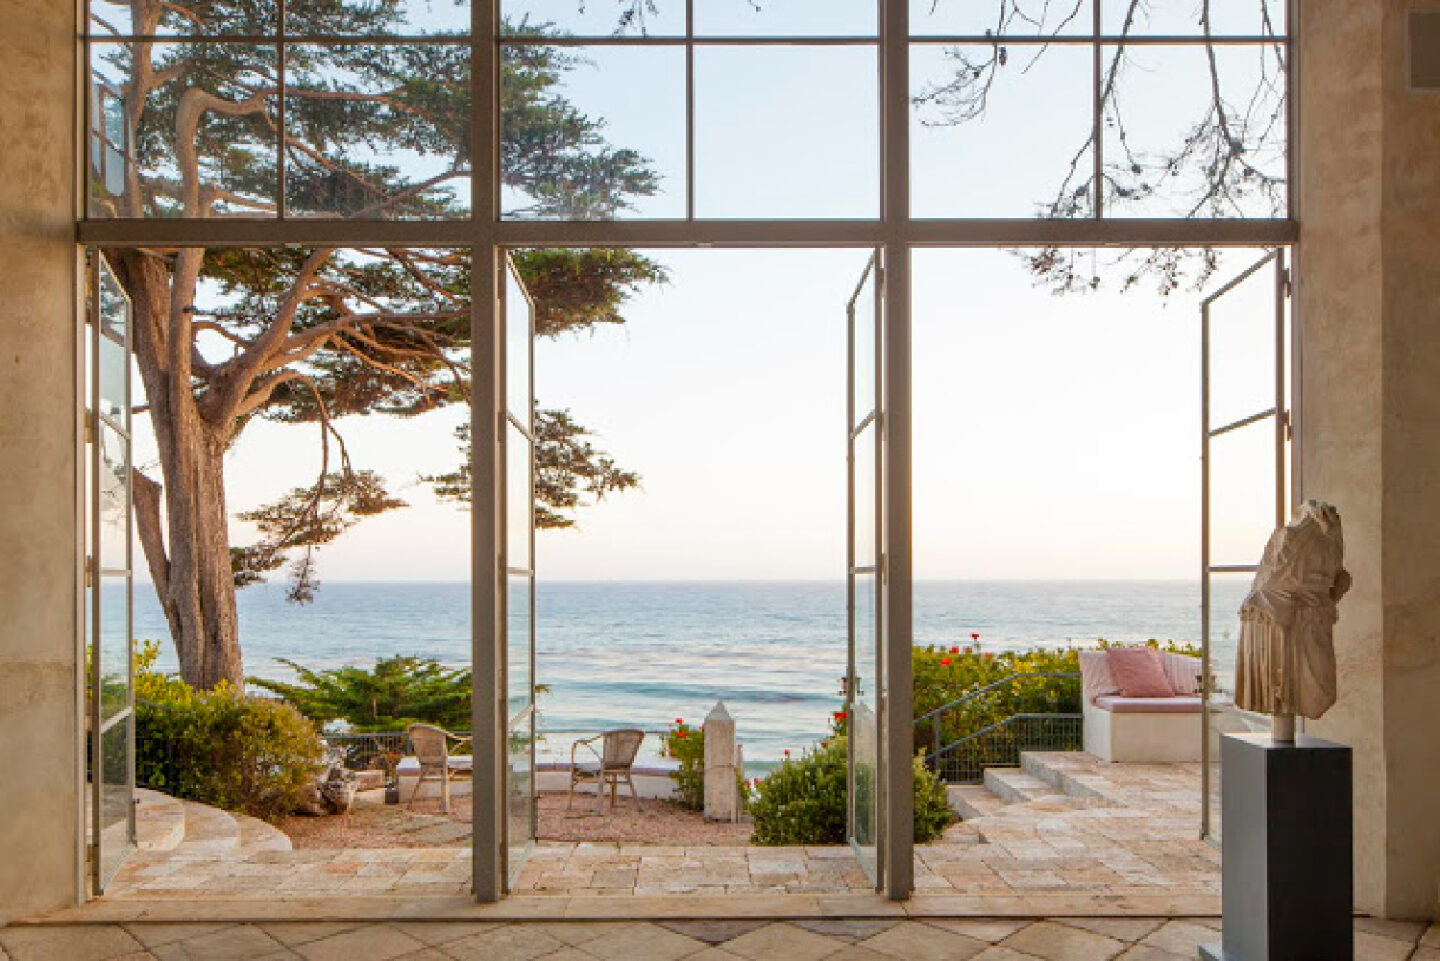 Richard Shapiro's Mediterranean style Malibu oceanfront home filled with ancient treasures and Old World European flavor. #oldworldstyle #fantasyhomes #malibudreamhome